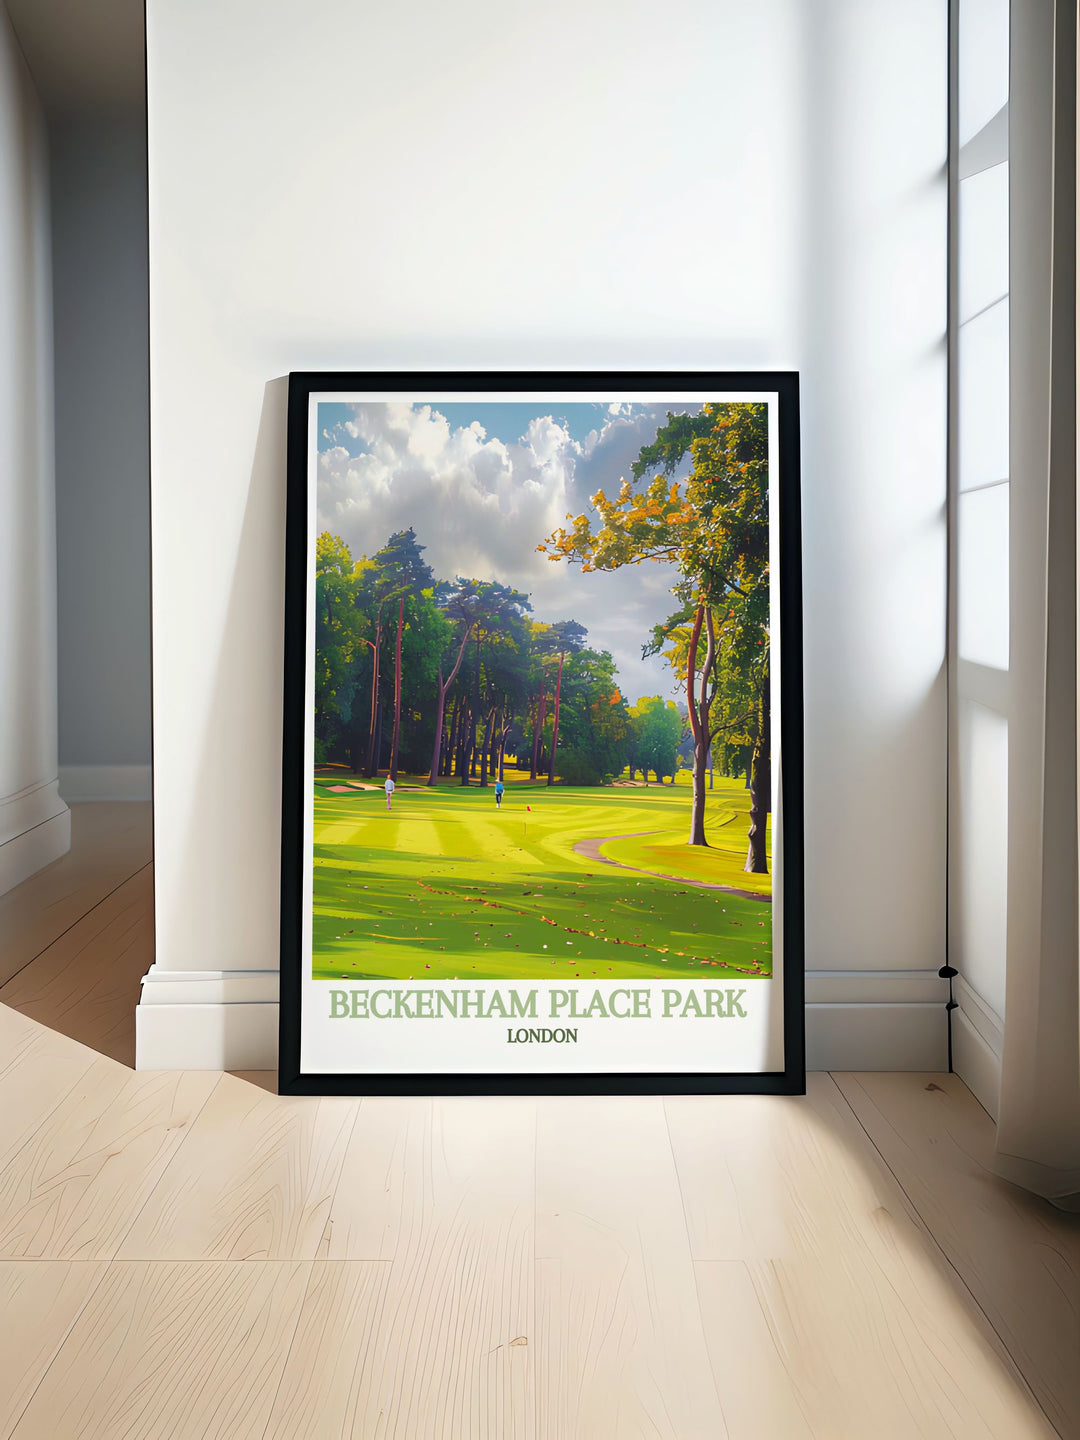 Beckenham Place Park gallery wall art showcasing the lush landscapes and serene pathways of one of Londons hidden gems, capturing the tranquility and natural beauty of the park in vibrant colors and detailed imagery, perfect for creating a peaceful atmosphere in any room.